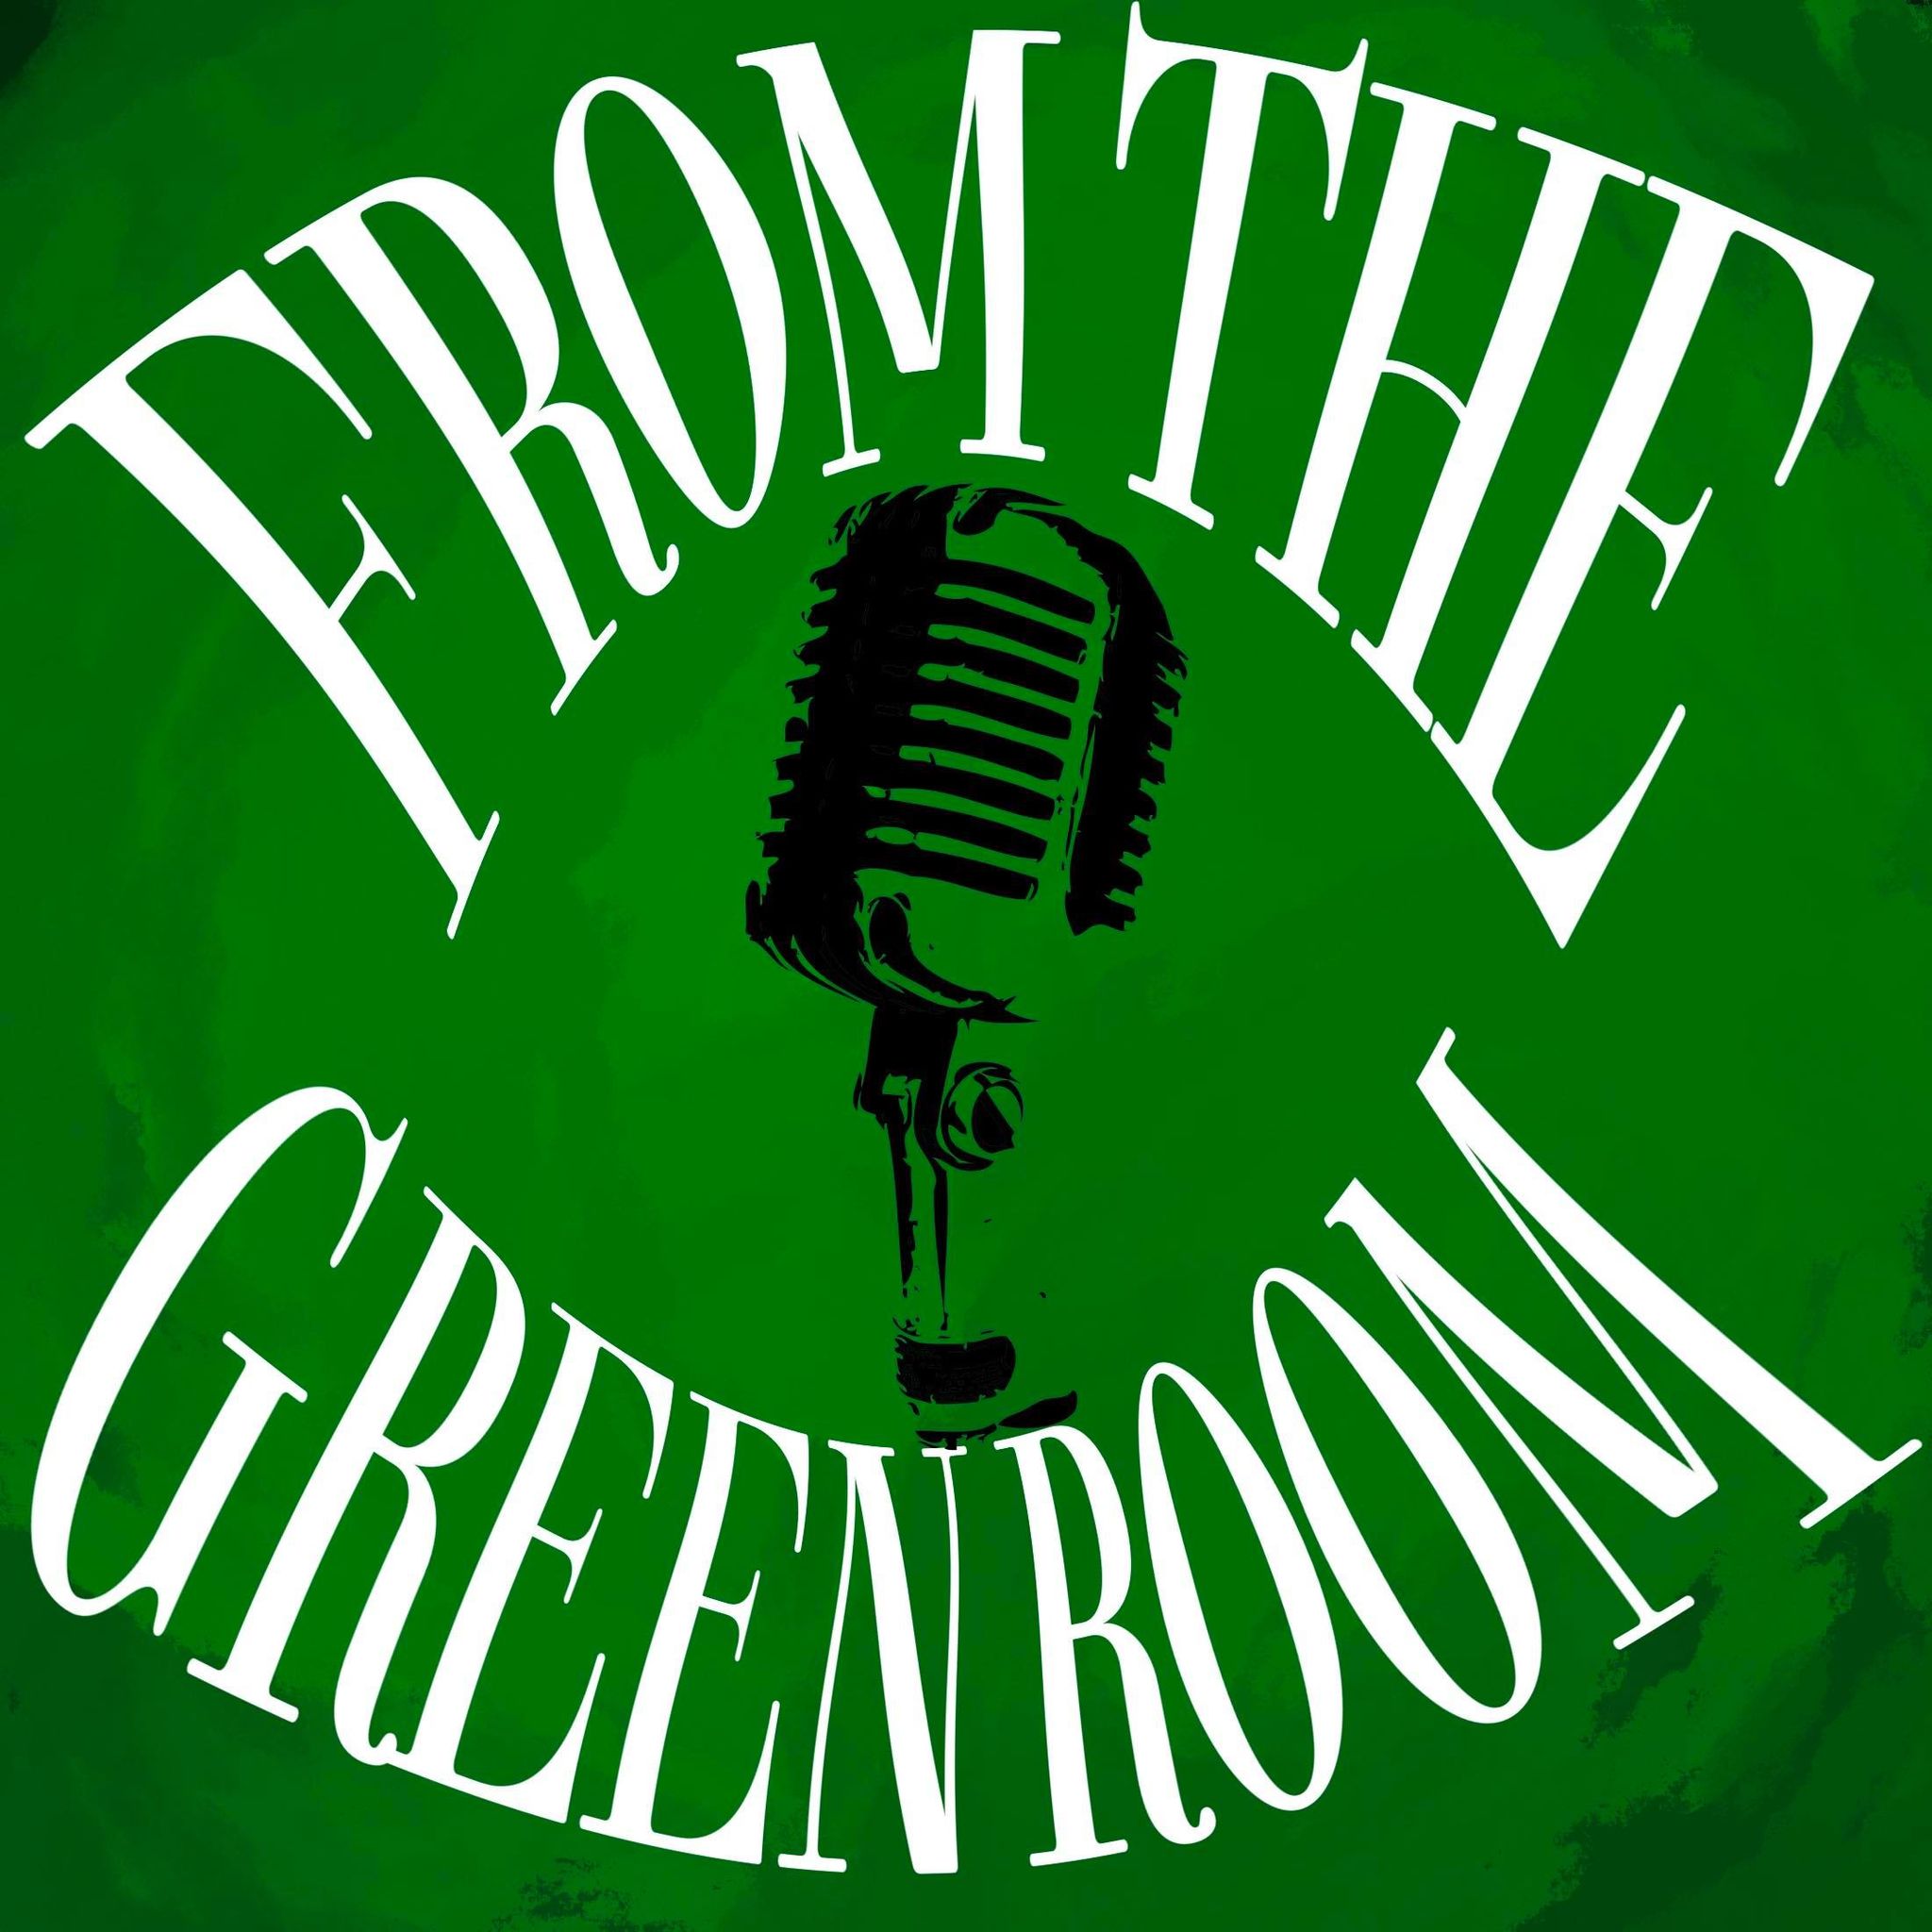 Episode 67: Drowning Pool-CJ of Drowning Pool stop’s by the Green Room to chat.